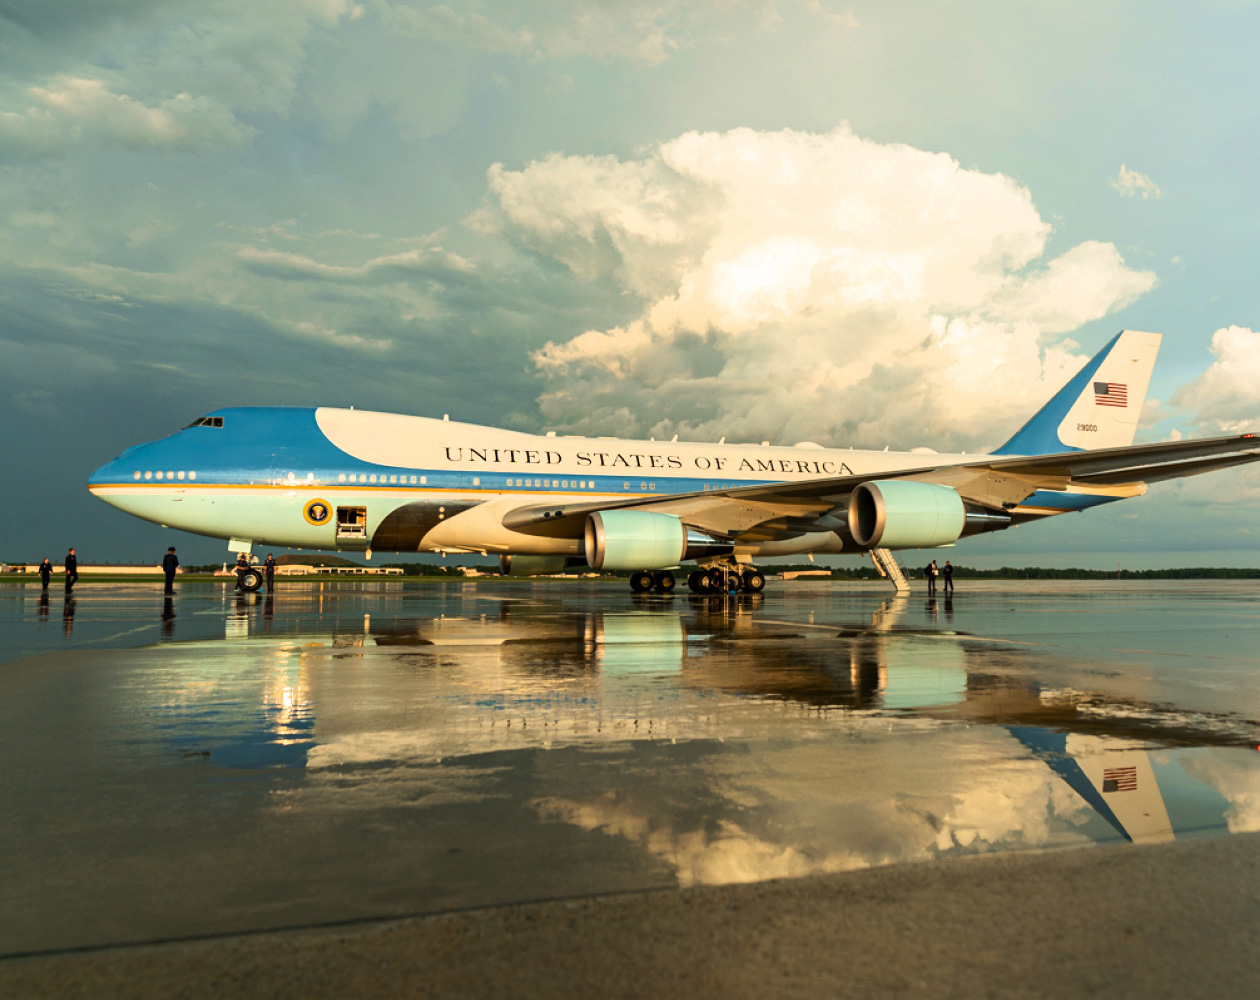 Air Force One | The White House